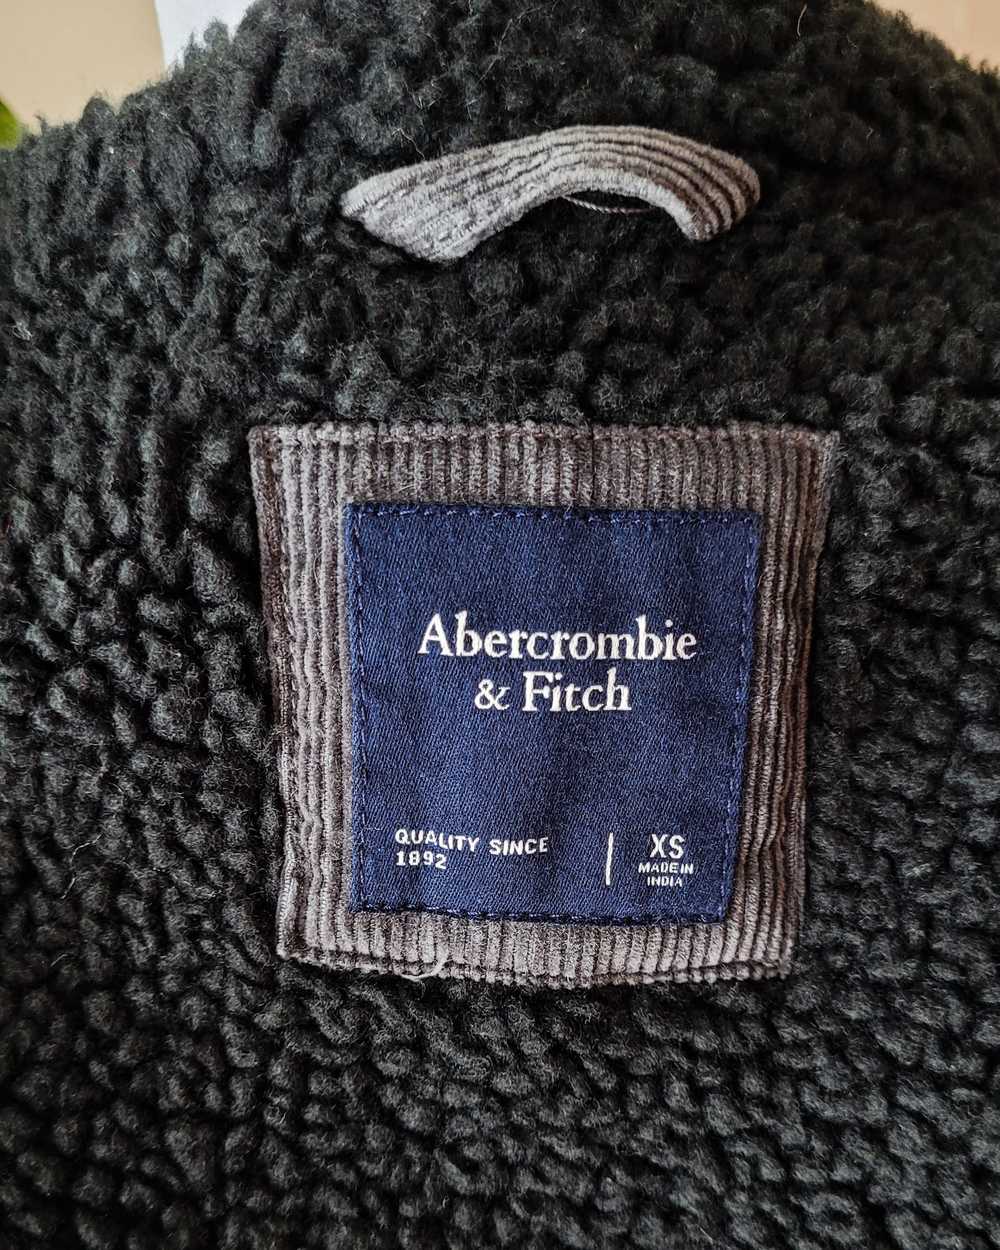 Abercrombie & Fitch ABERCROMBIE & FITCH Trucker J… - image 7